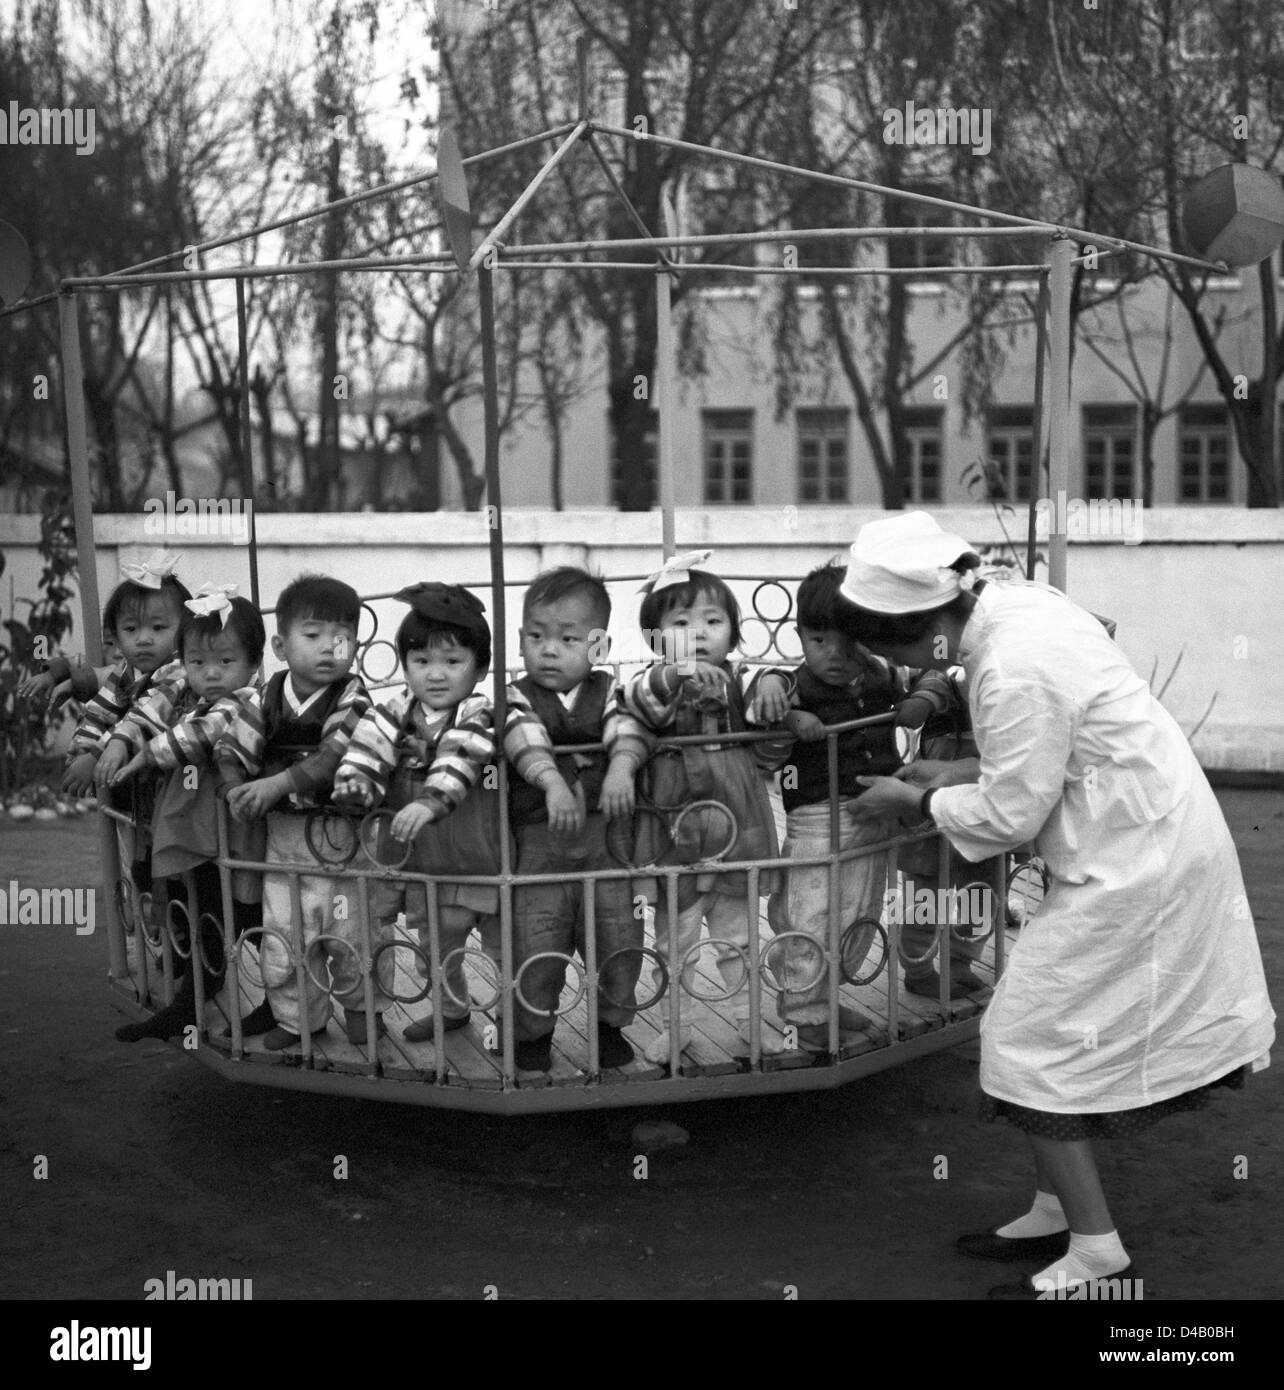 Children stand in a carousel on the playground in a kindergarten in Pyongyang, the capital of the Korean Democratic People's Republic, photographed on the 1st of November in 1971.     Photo: ddrbildarchiv.de / Klaus Morgenstern - GESPERRT FÜR BILDFUNK Stock Photo